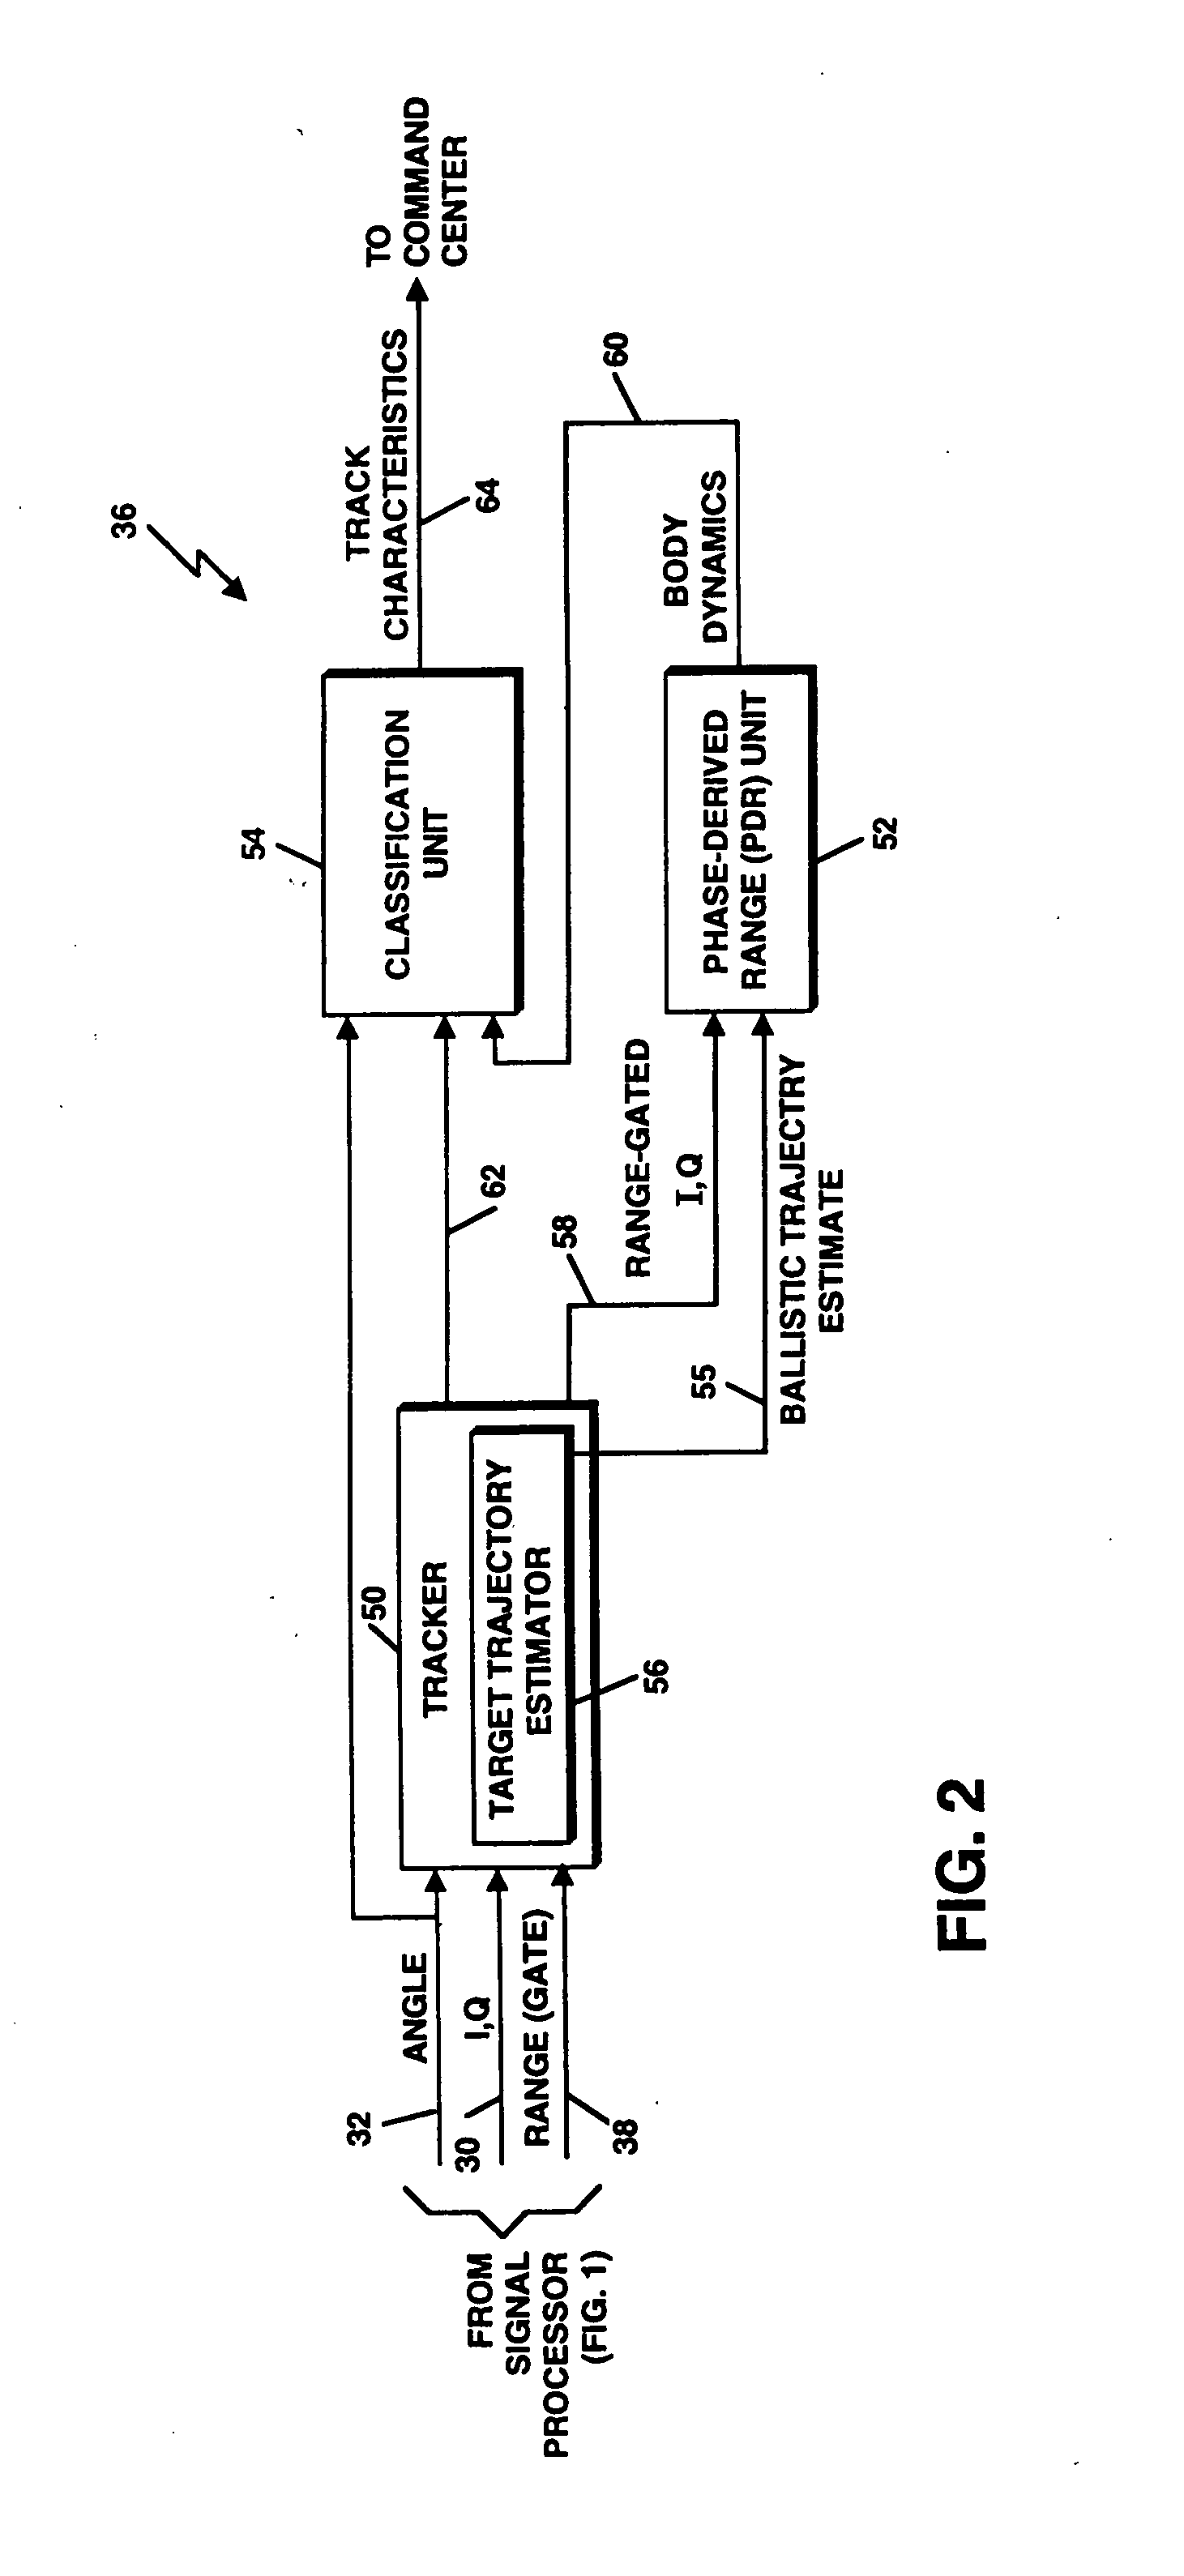 Process for phase-derived range measurements